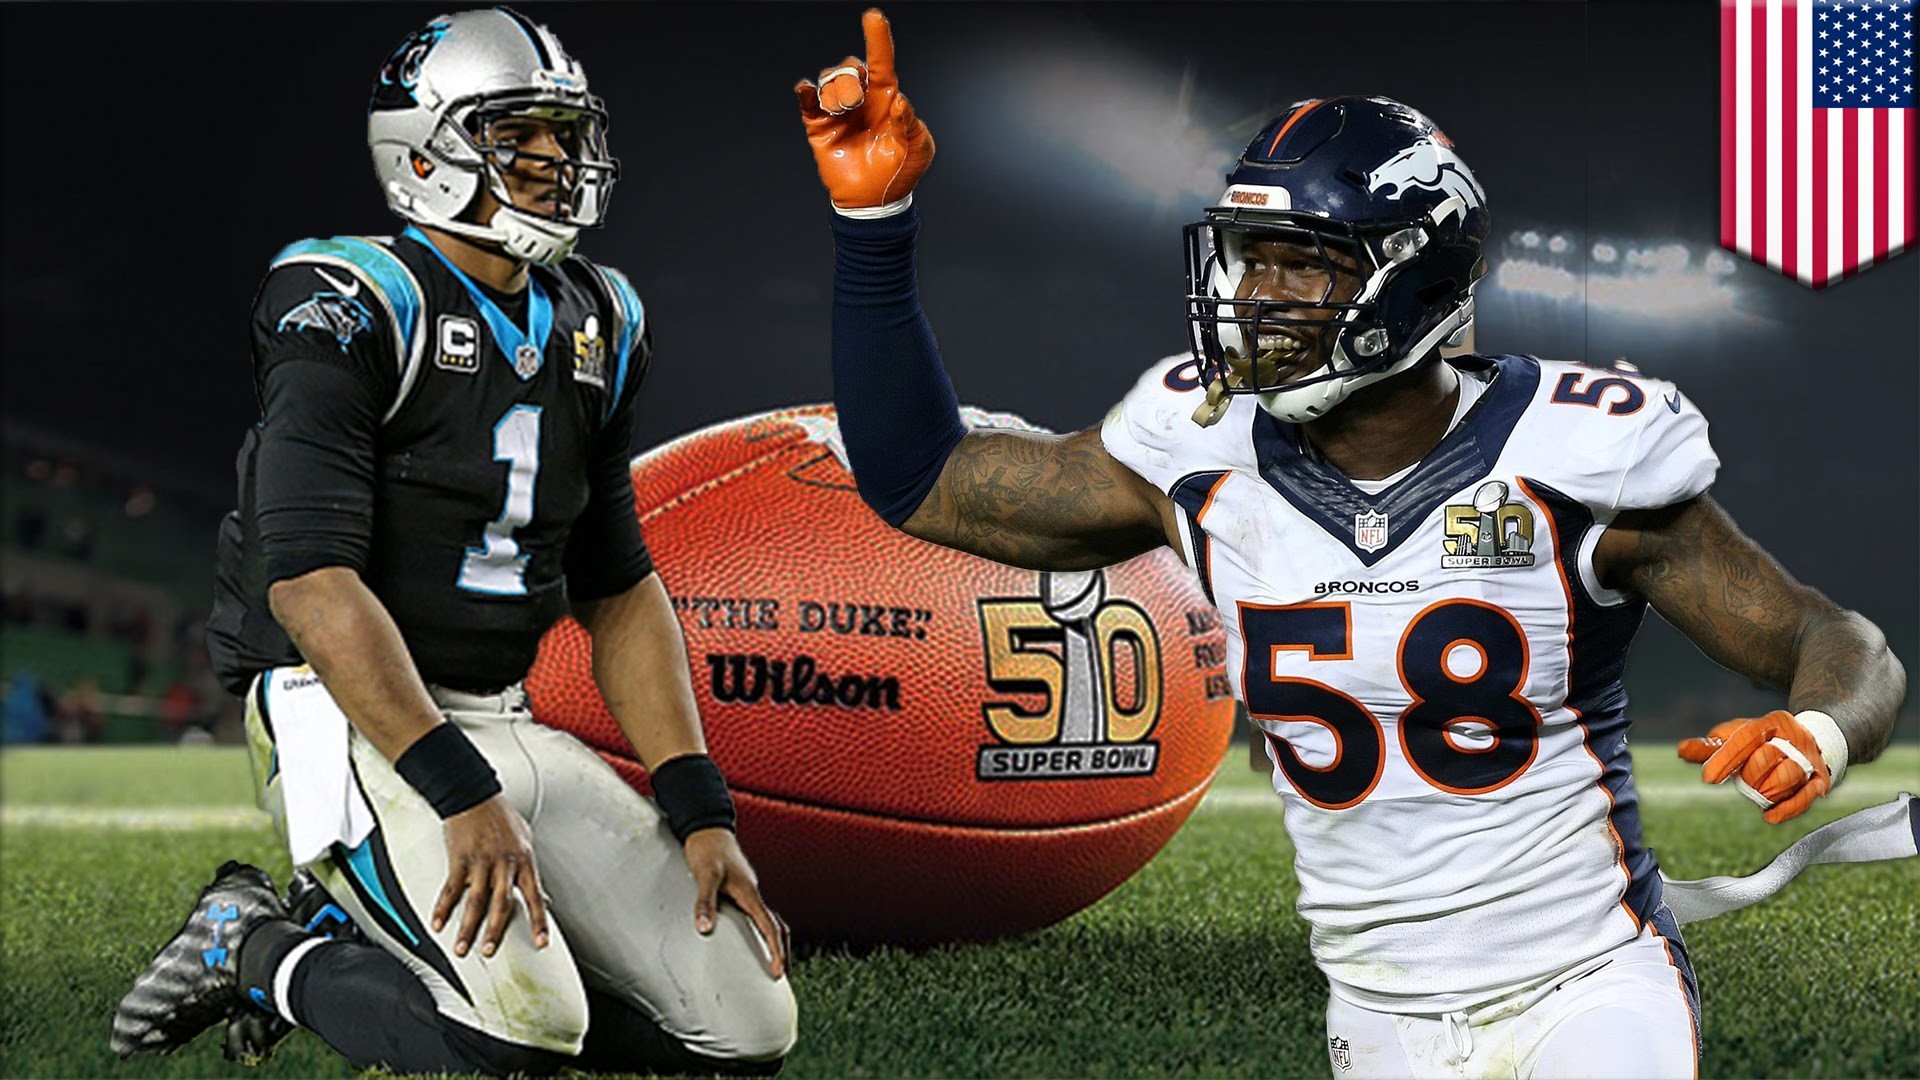 1920x1080 Broncos win Super Bowl 50: Denver D annihilates Cam and Panthers for 24-10  win - YouTube